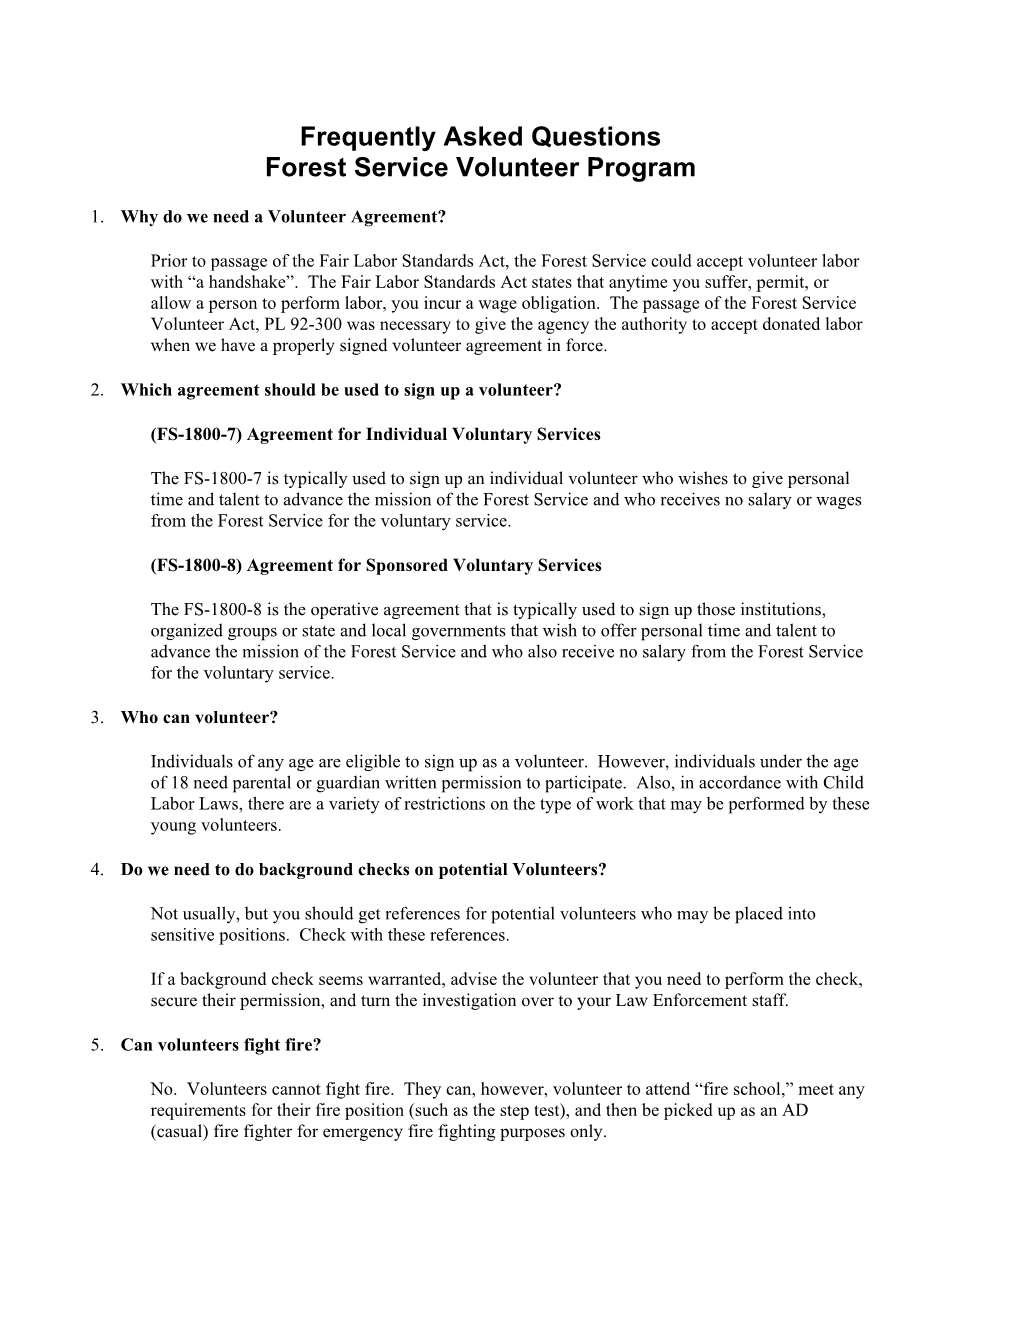 Frequently Asked Questions Forest Service Volunteer Program